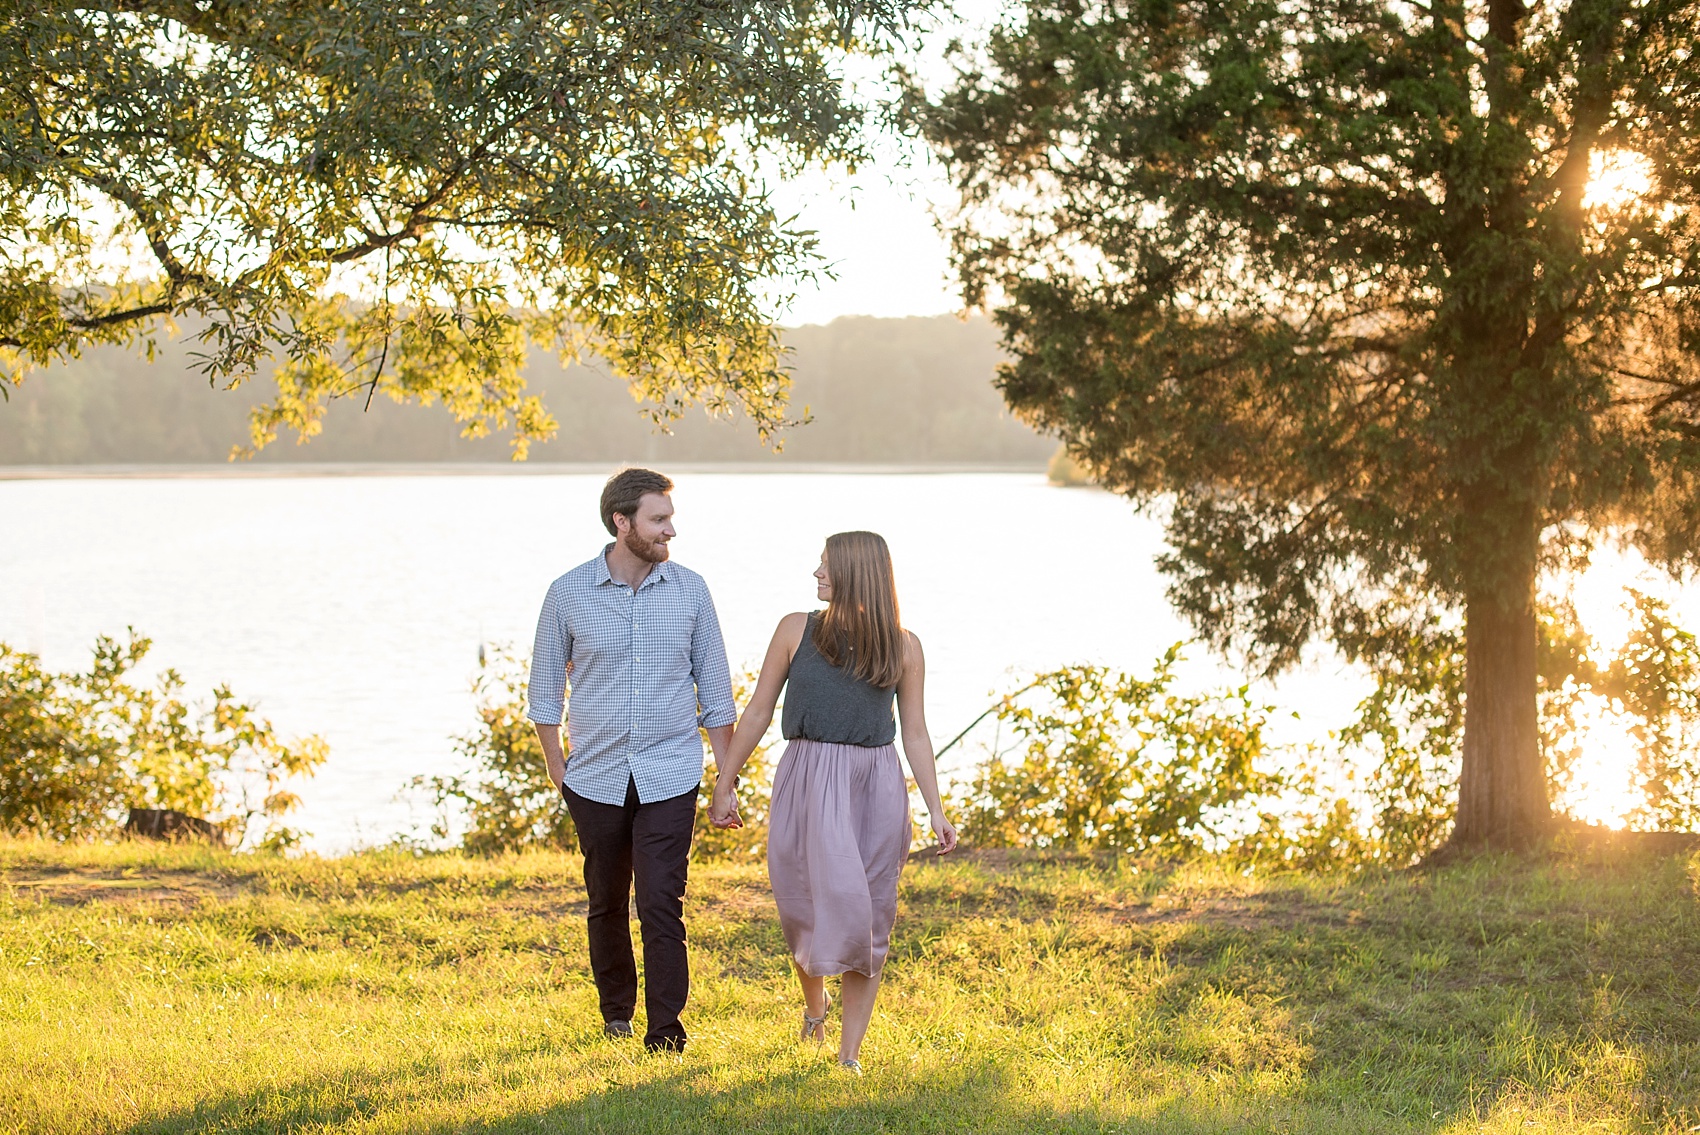 Raleigh, North Carolina engagement photos by Mikkel Paige Photography. Golden hour at Lake Raleigh.